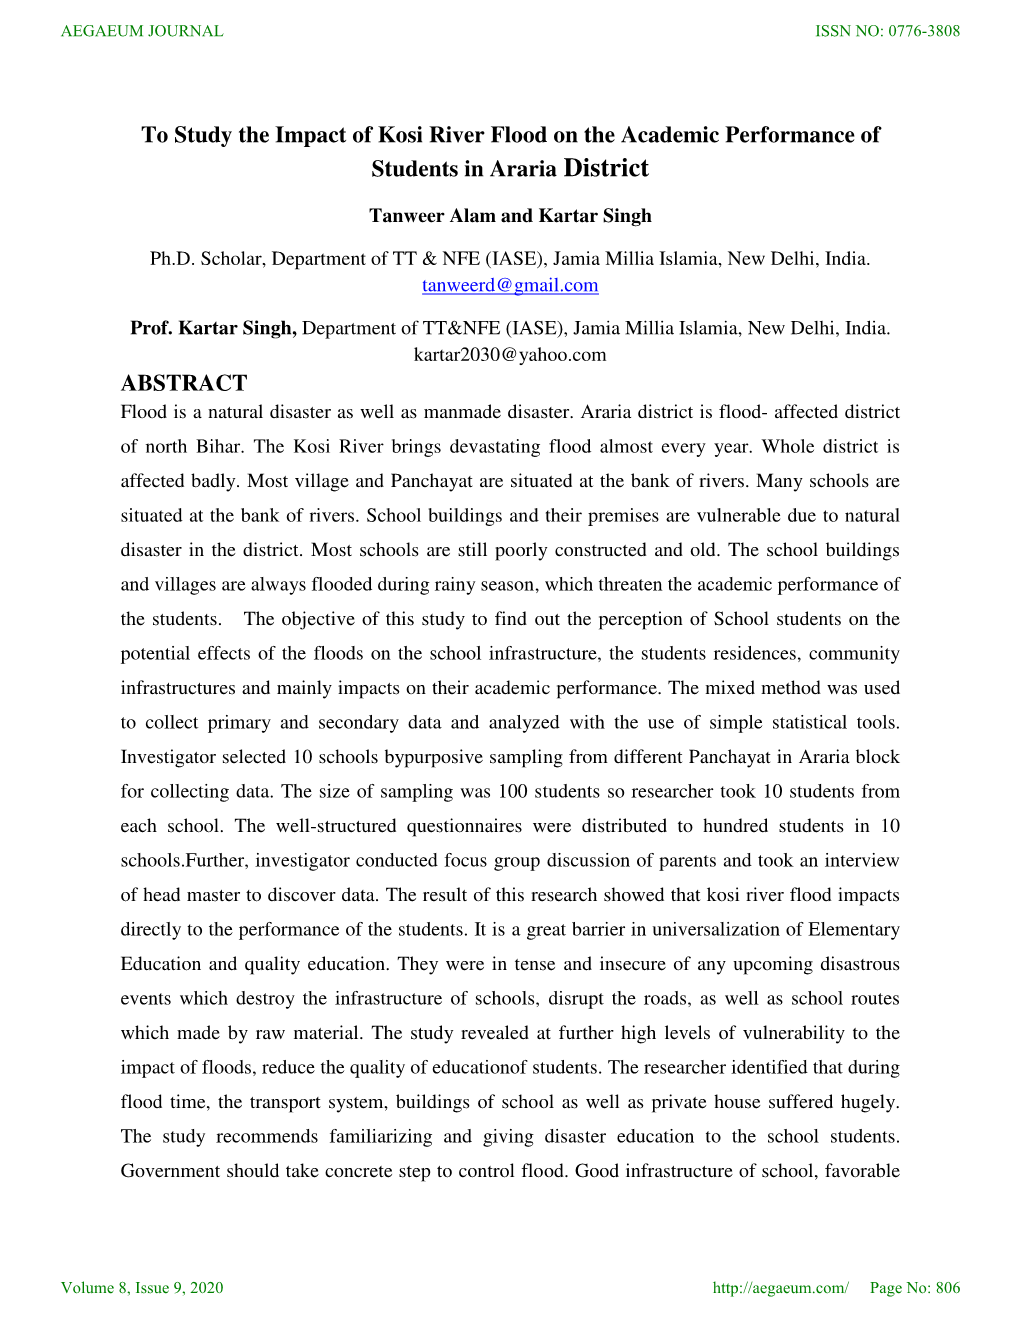 To Study the Impact of Kosi River Flood on the Academic Performance of Students in Araria District